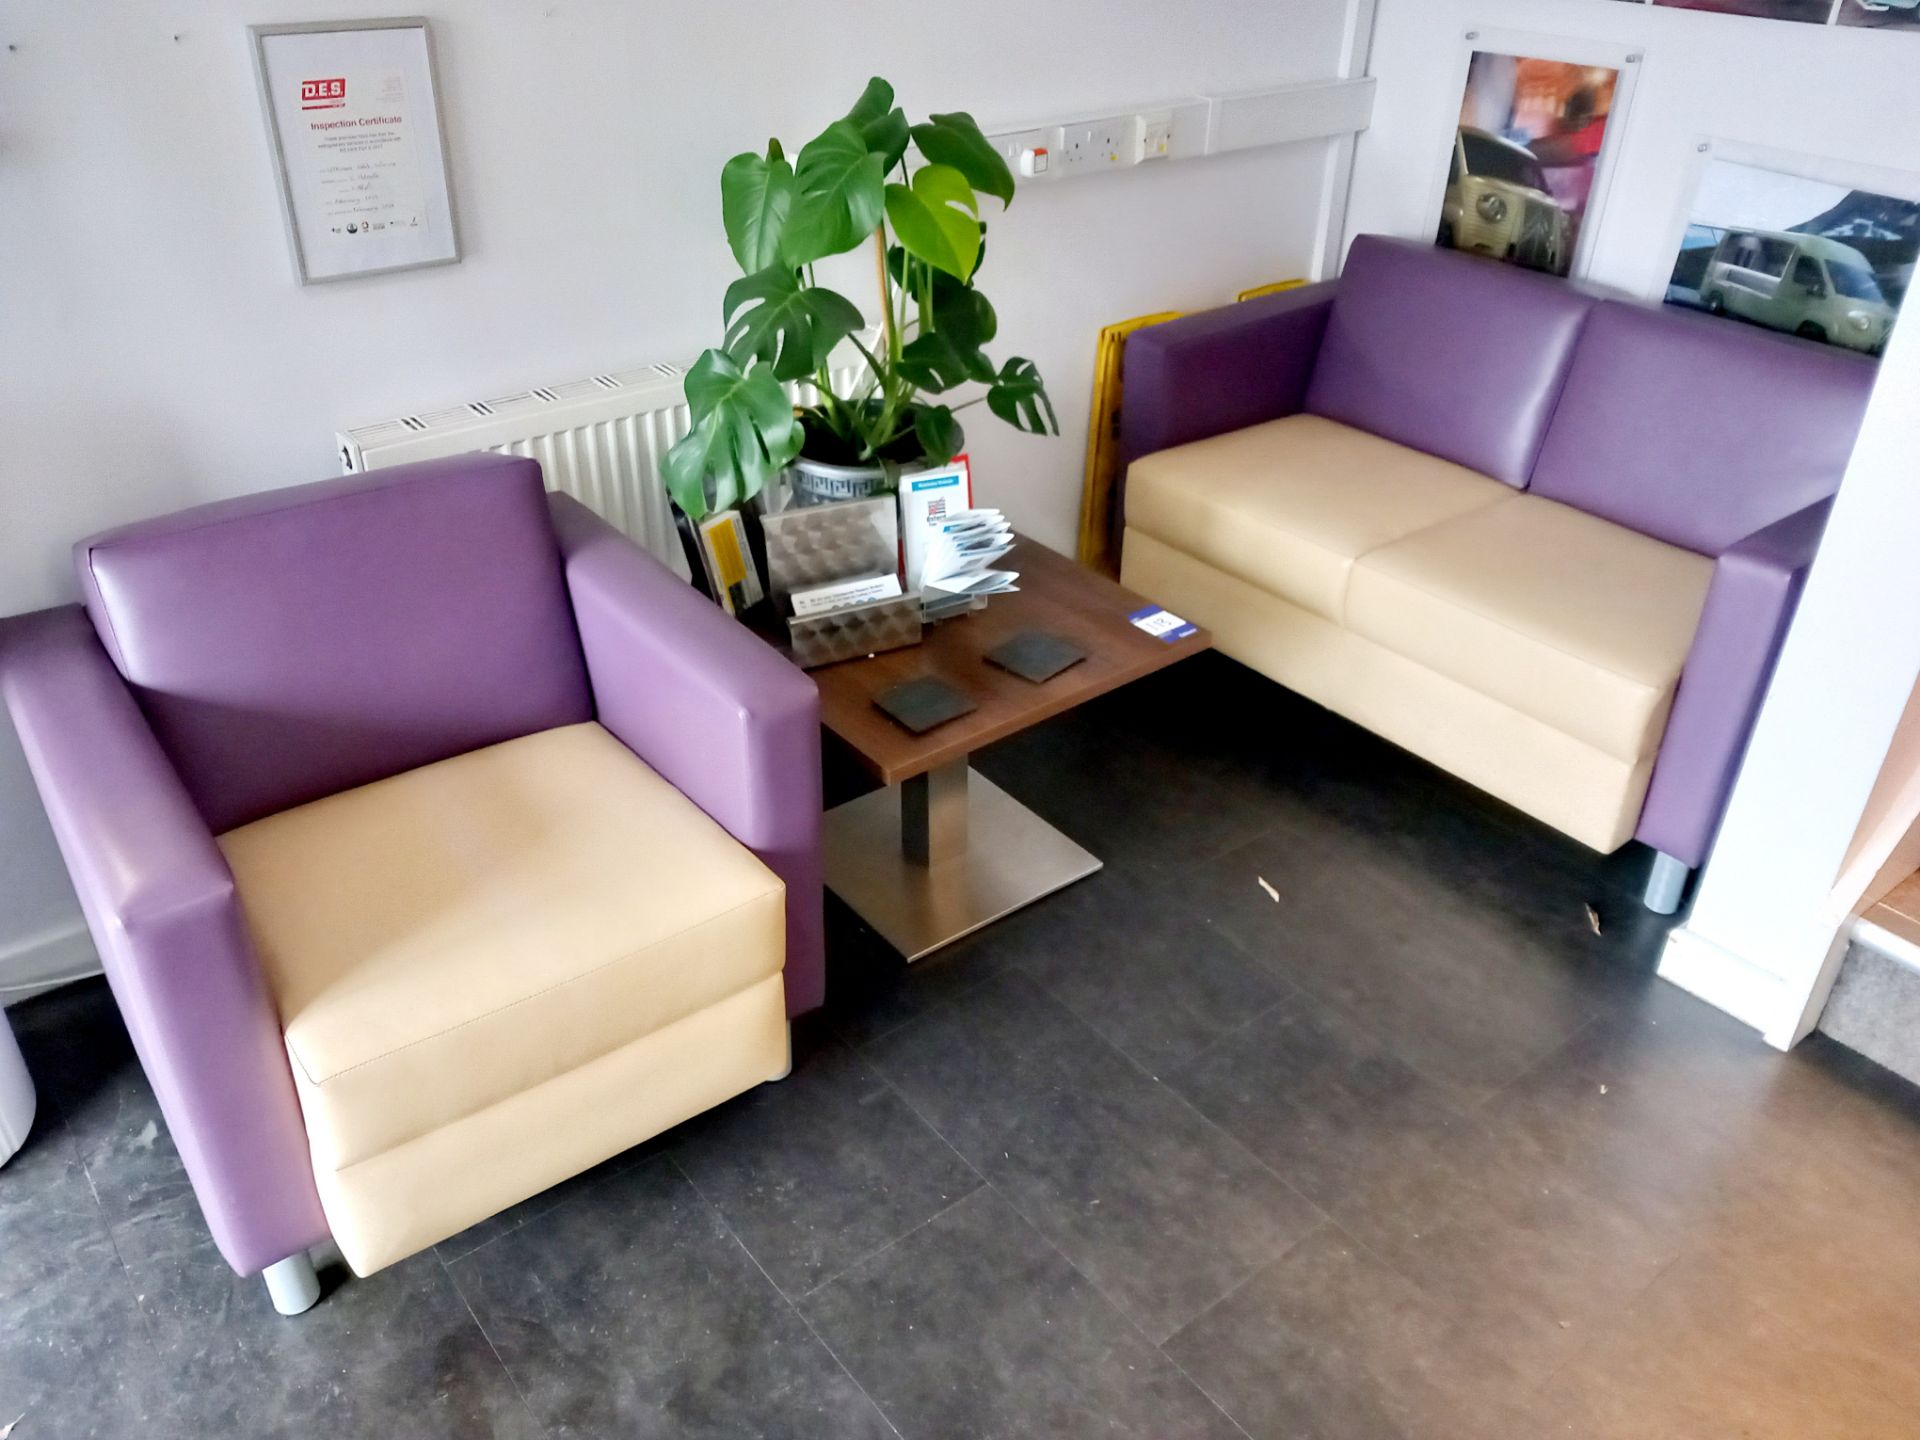 Reception furniture to include cream & purple leather 2 seater sofa and armchair with small coffee